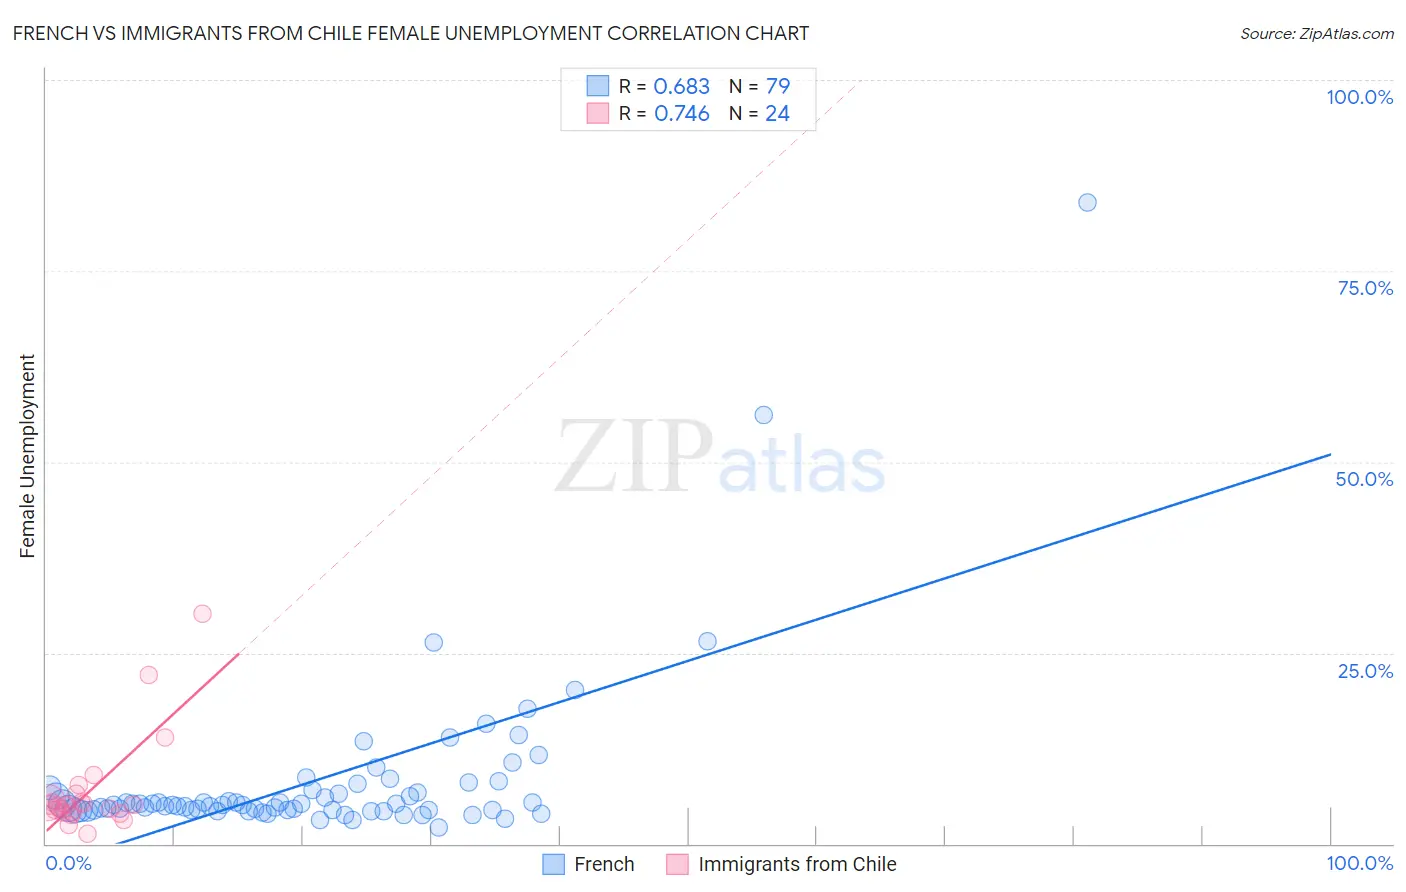 French vs Immigrants from Chile Female Unemployment